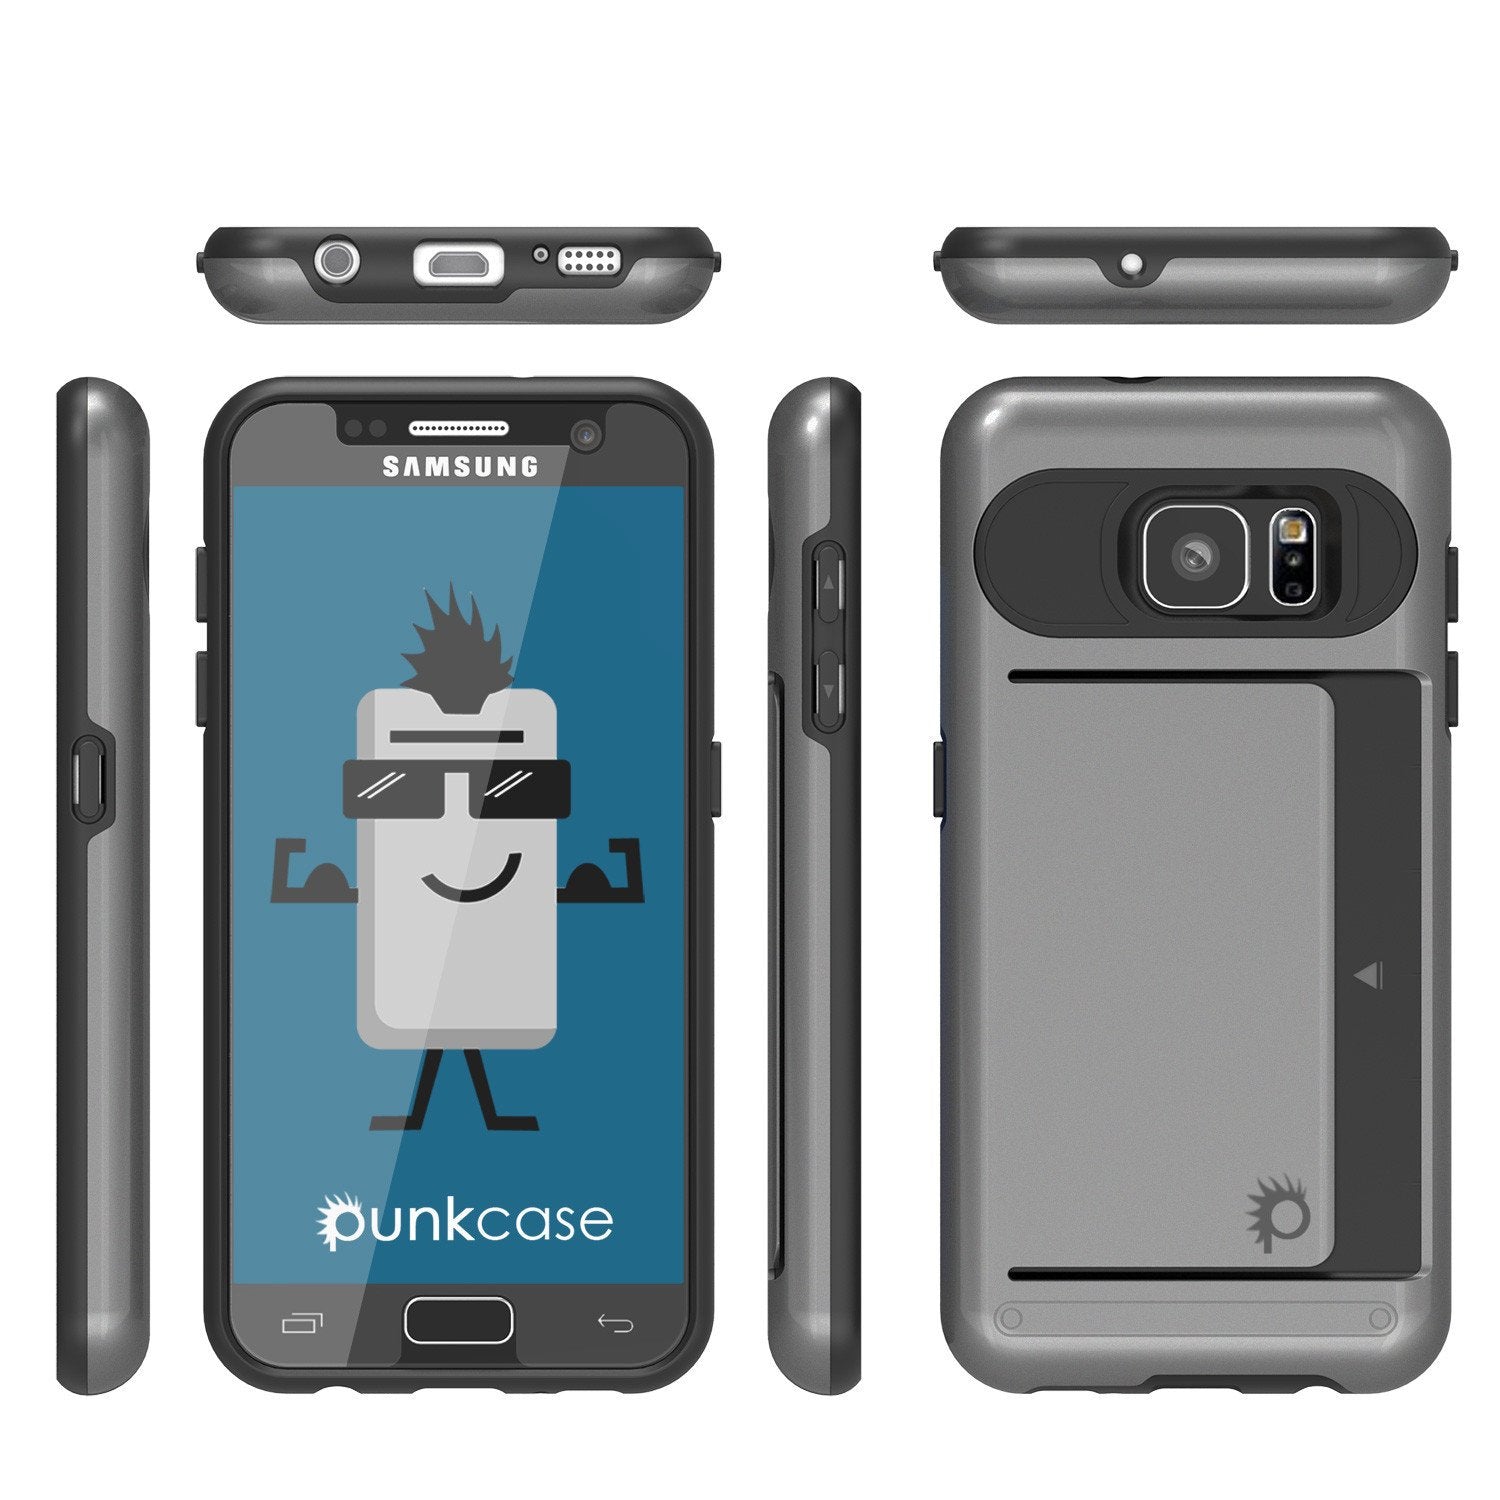 Galaxy Note 5 Case PunkCase CLUTCH Grey Series Slim Armor Soft Cover Case w/ Tempered Glass